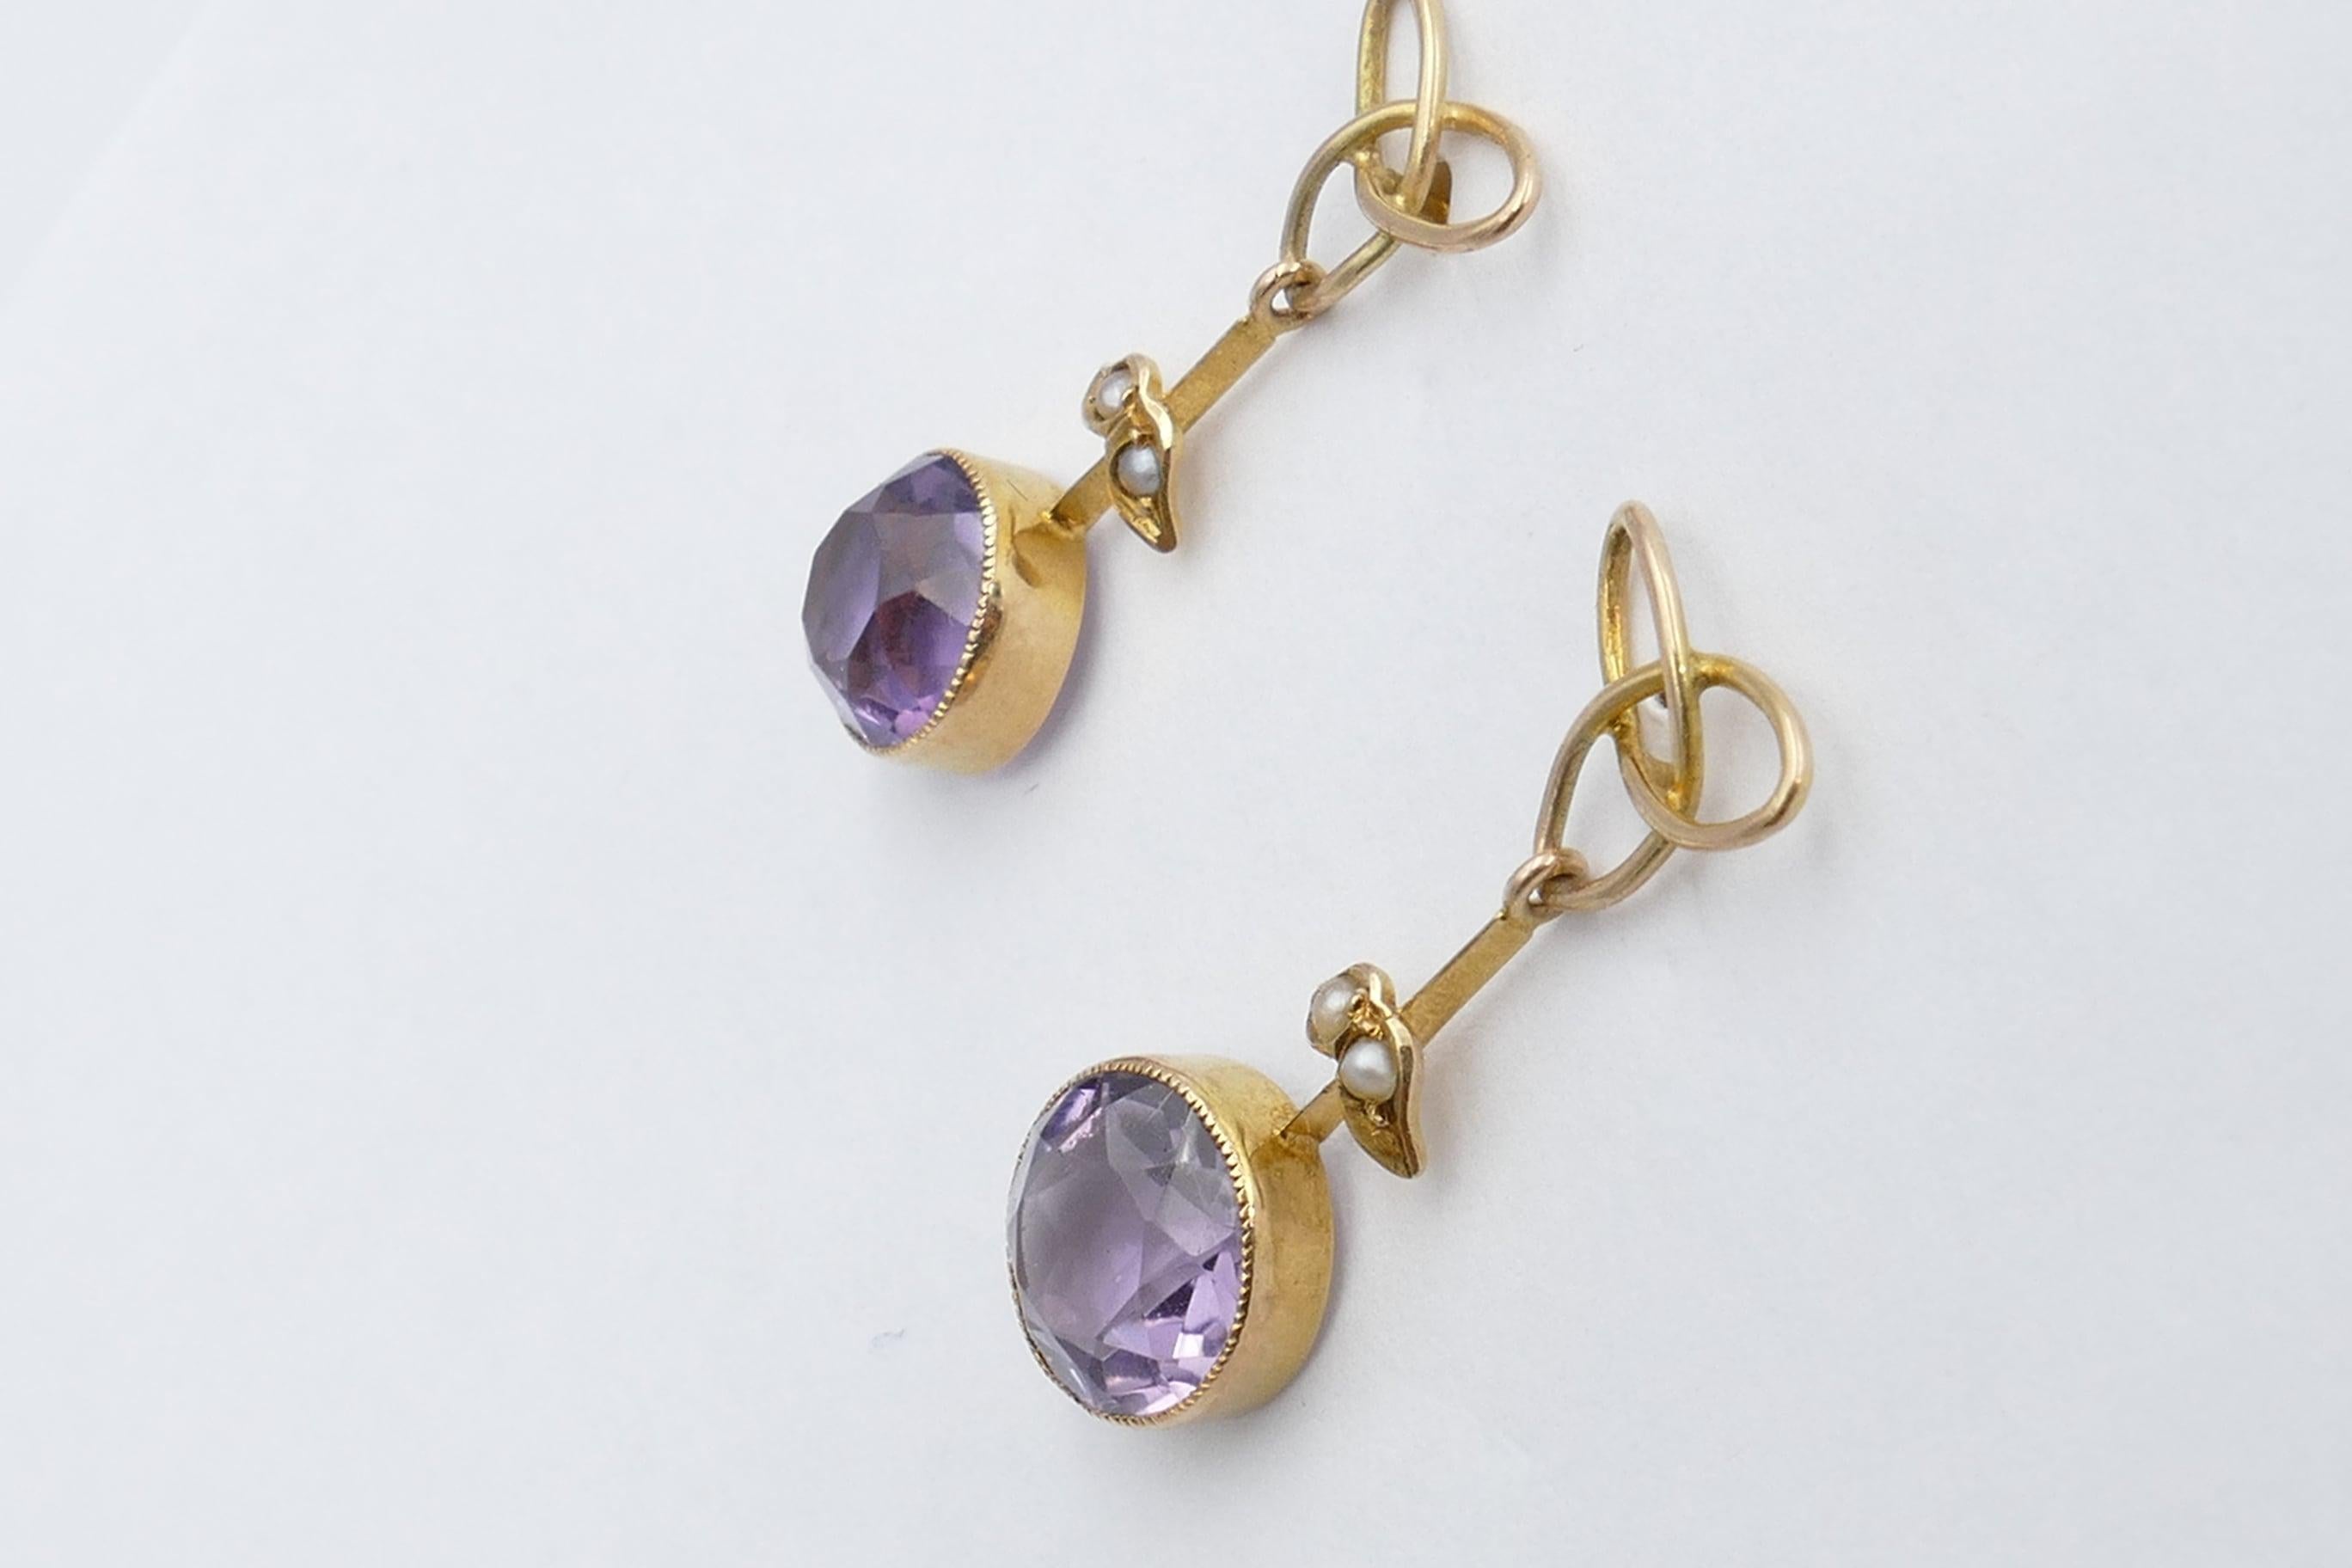 Edwardian Yellow Gold Amethyst and Pearl Earrings In Excellent Condition For Sale In Splitter's Creek, NSW